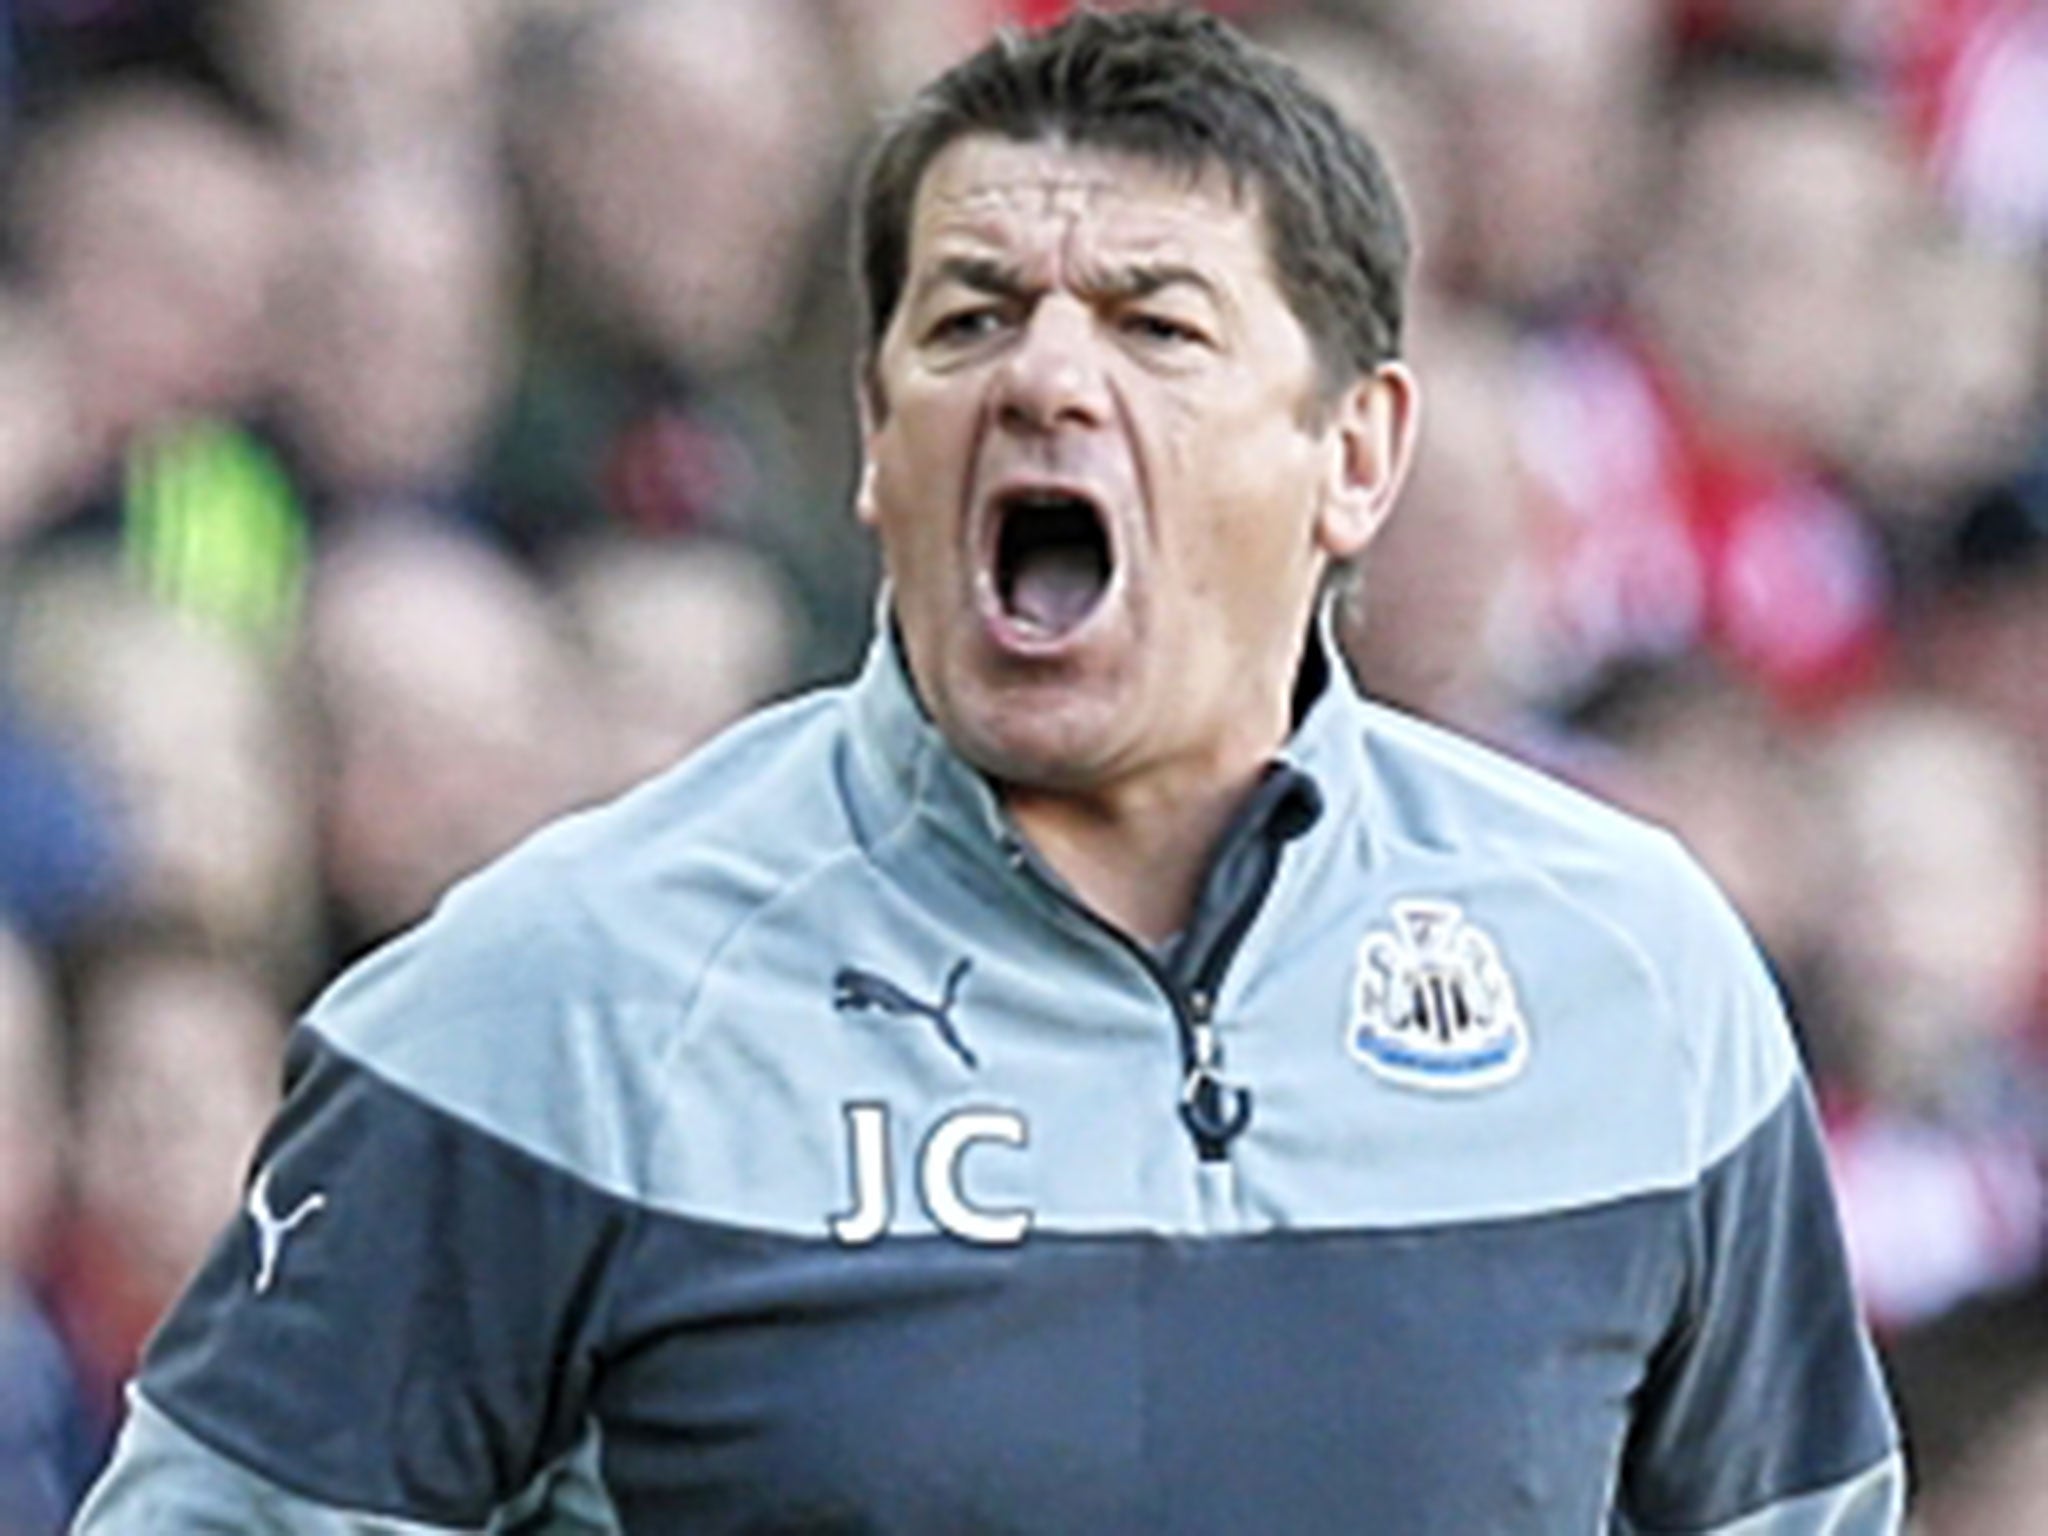 The Newcastle manager John Carver